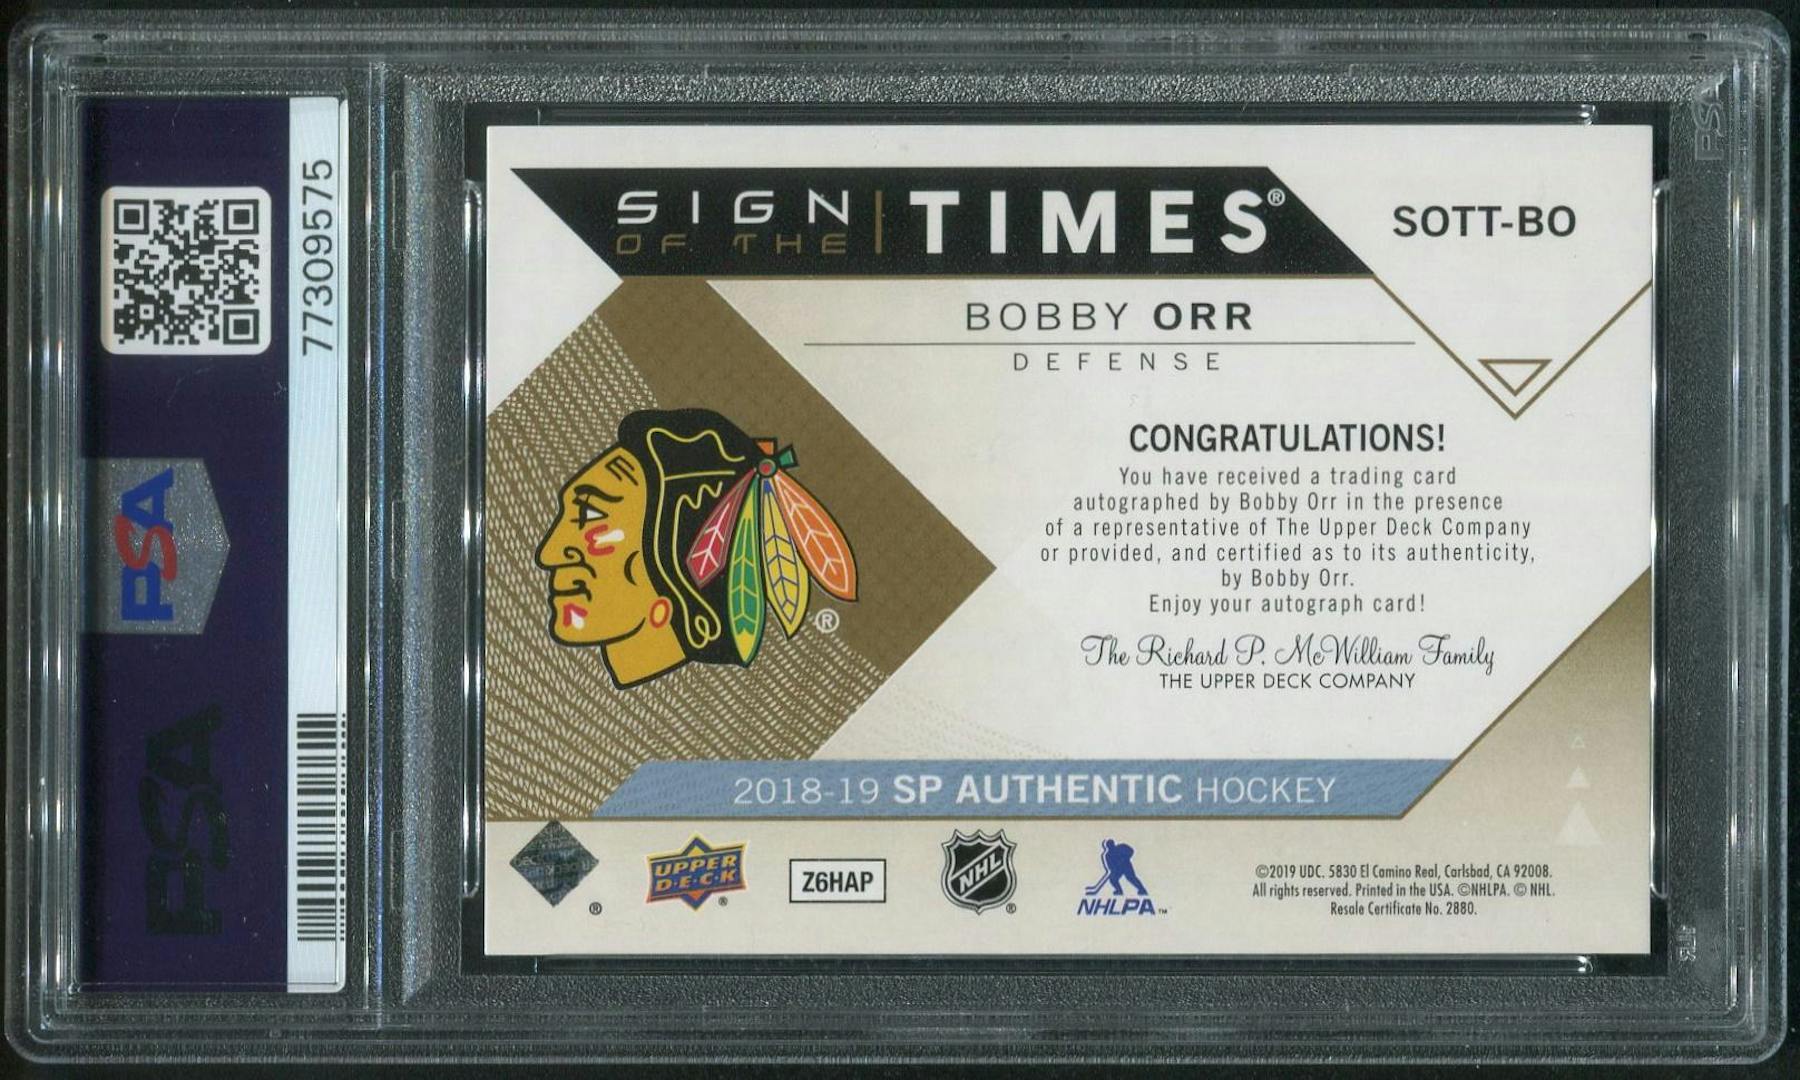 2018/19 SP Authentic Hockey #SOTTBO Bobby Orr Sign of the Times Auto PSA 10  (GEM MT)